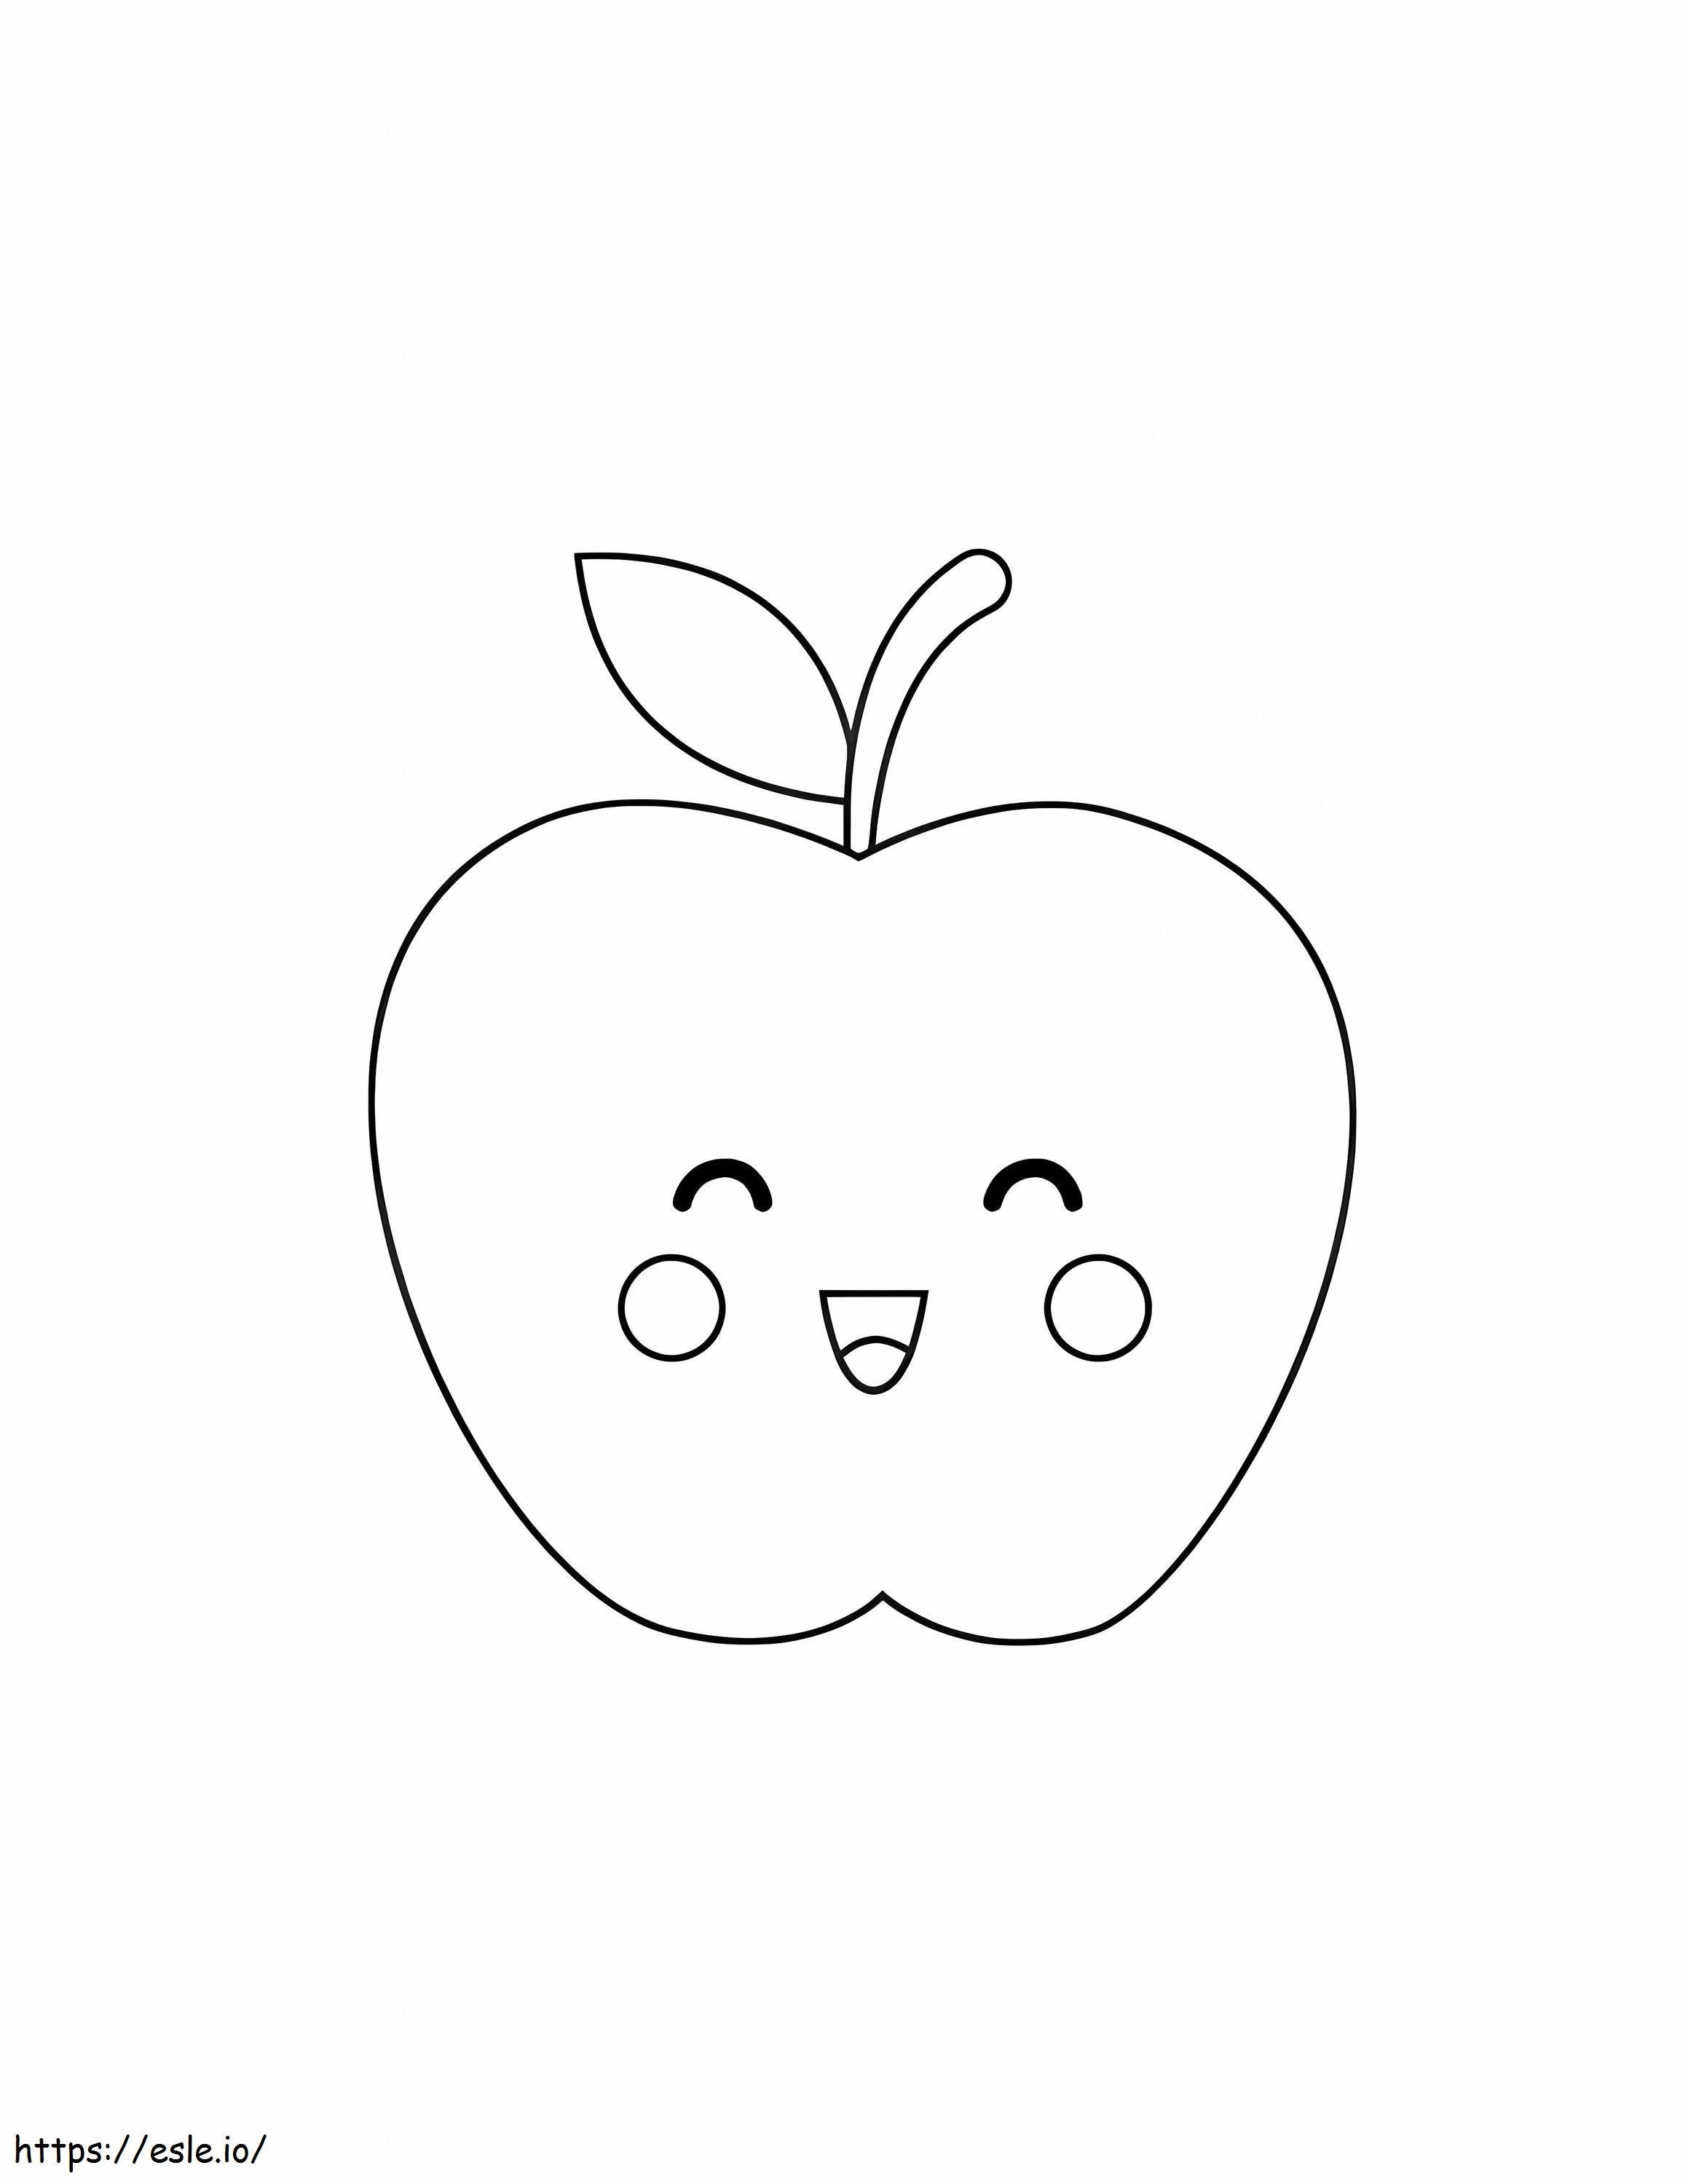 Cute Funny Apple coloring page